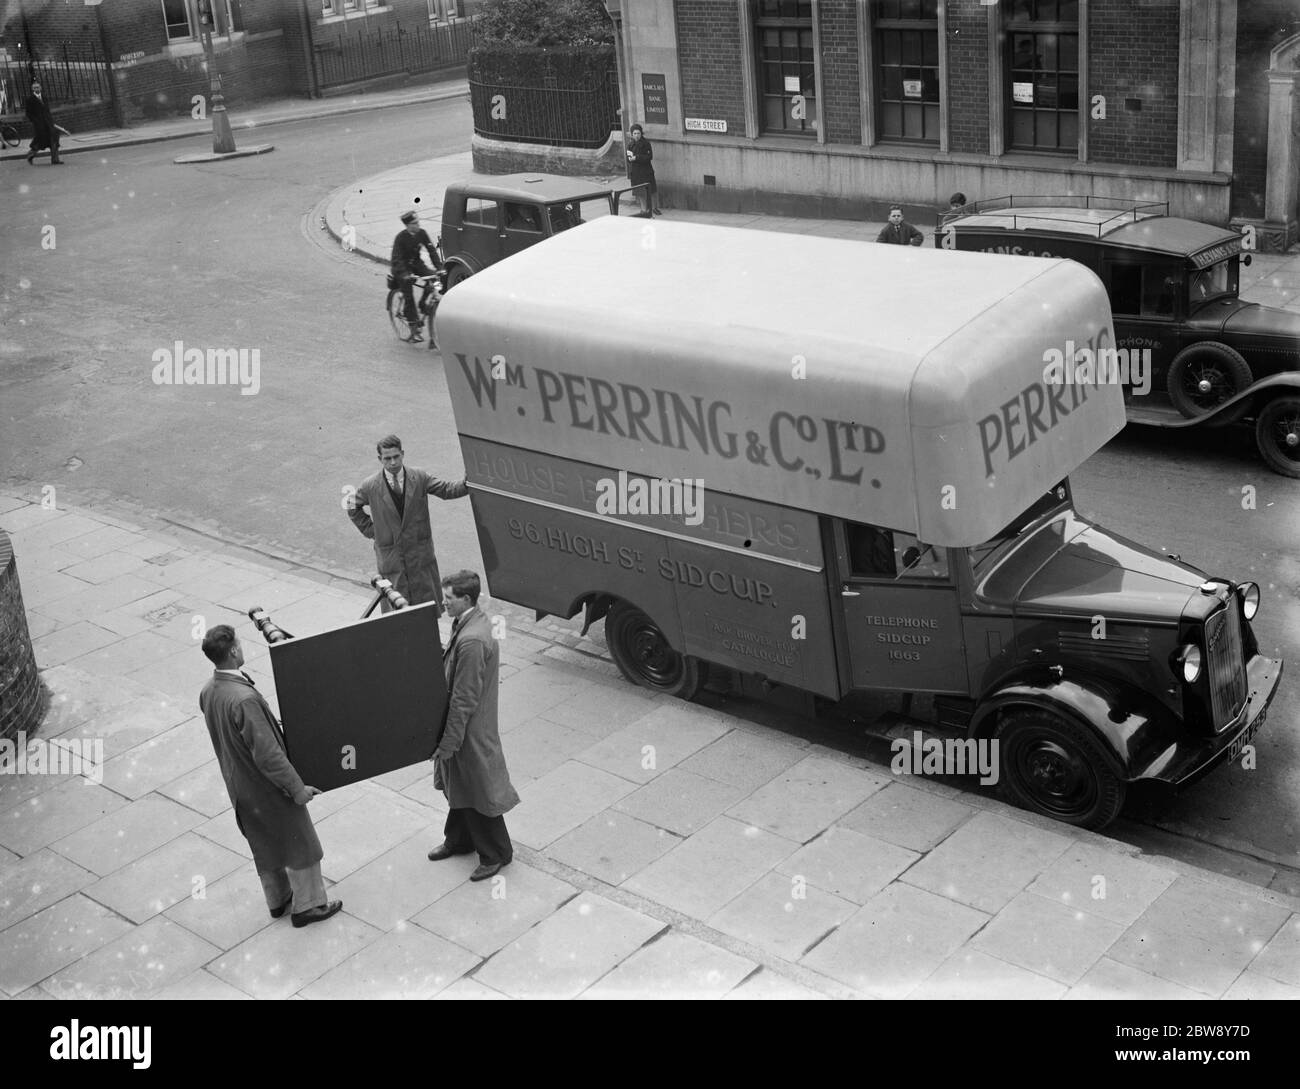 A Bedford truck belonging to W Perring and Co Ltd , the house furnishers . Workers are loading a table onto the truck at their the company 's store in Sidcup , Kent . 1936 . Stock Photo